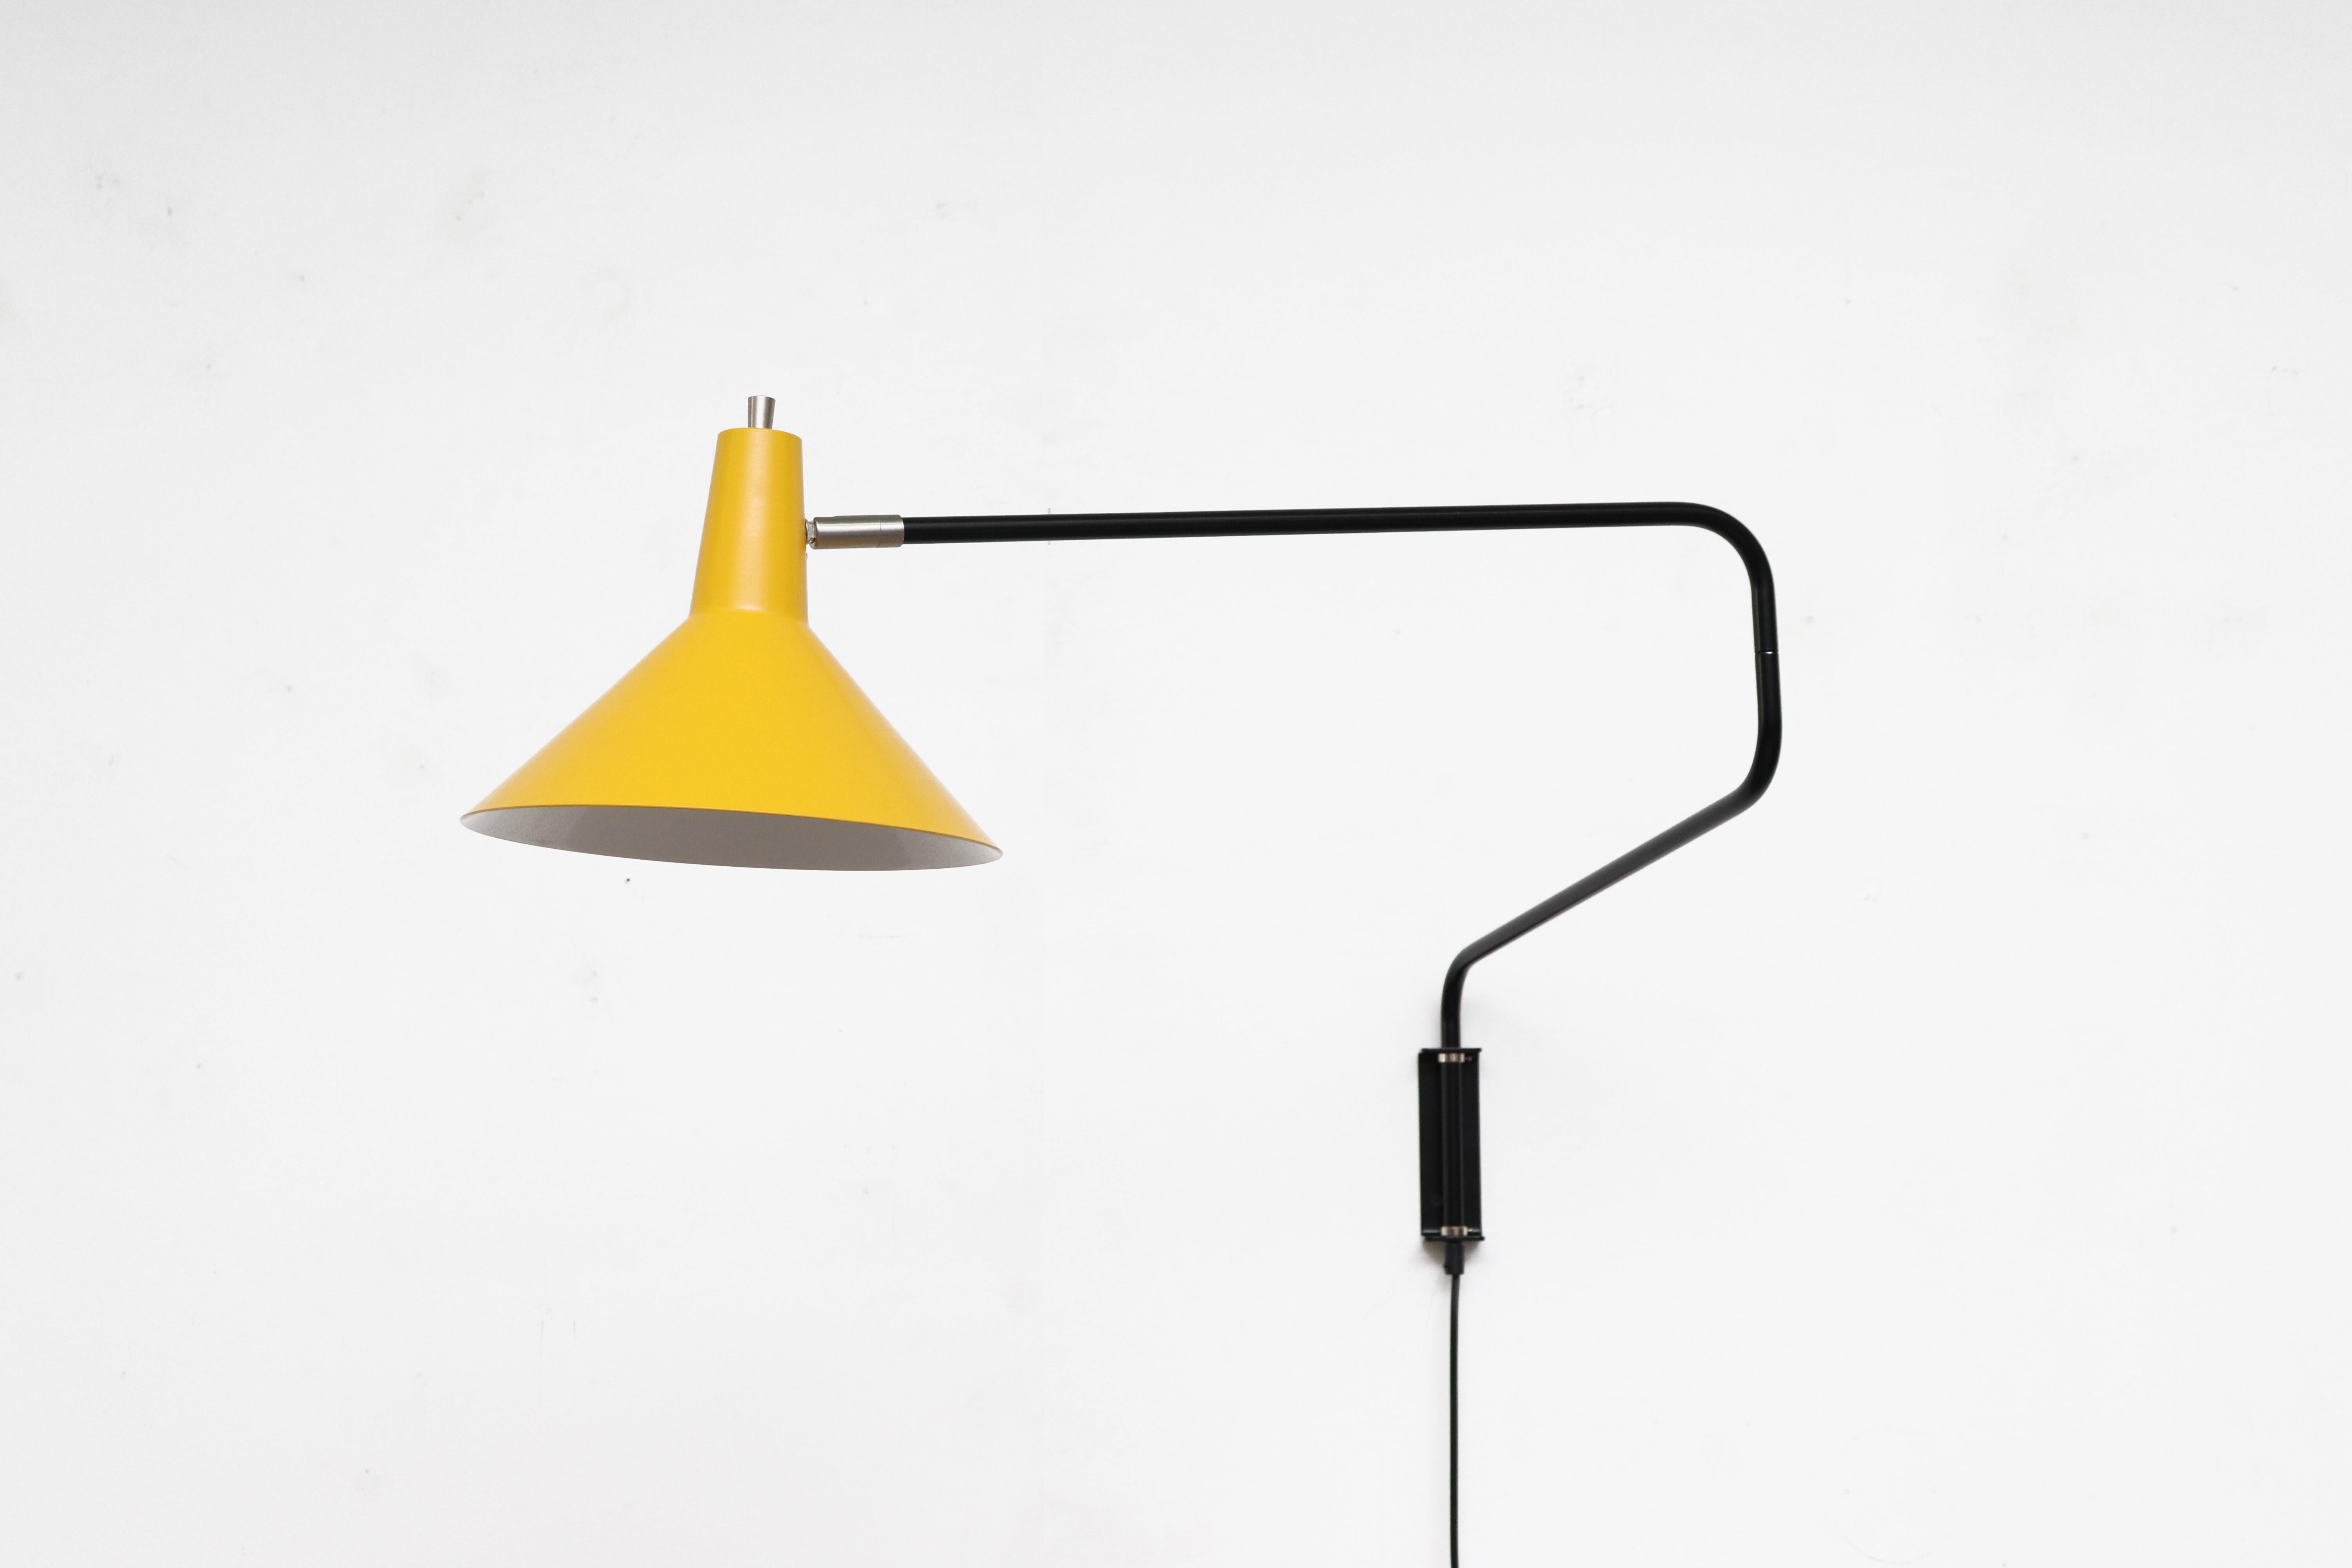 Newly re-issued Anvia 'The Paper Clip' wall lamp in yellow with black frame. Has paper clip style arm that swings to extend or retract for versatile use and tilting/rotating shade.